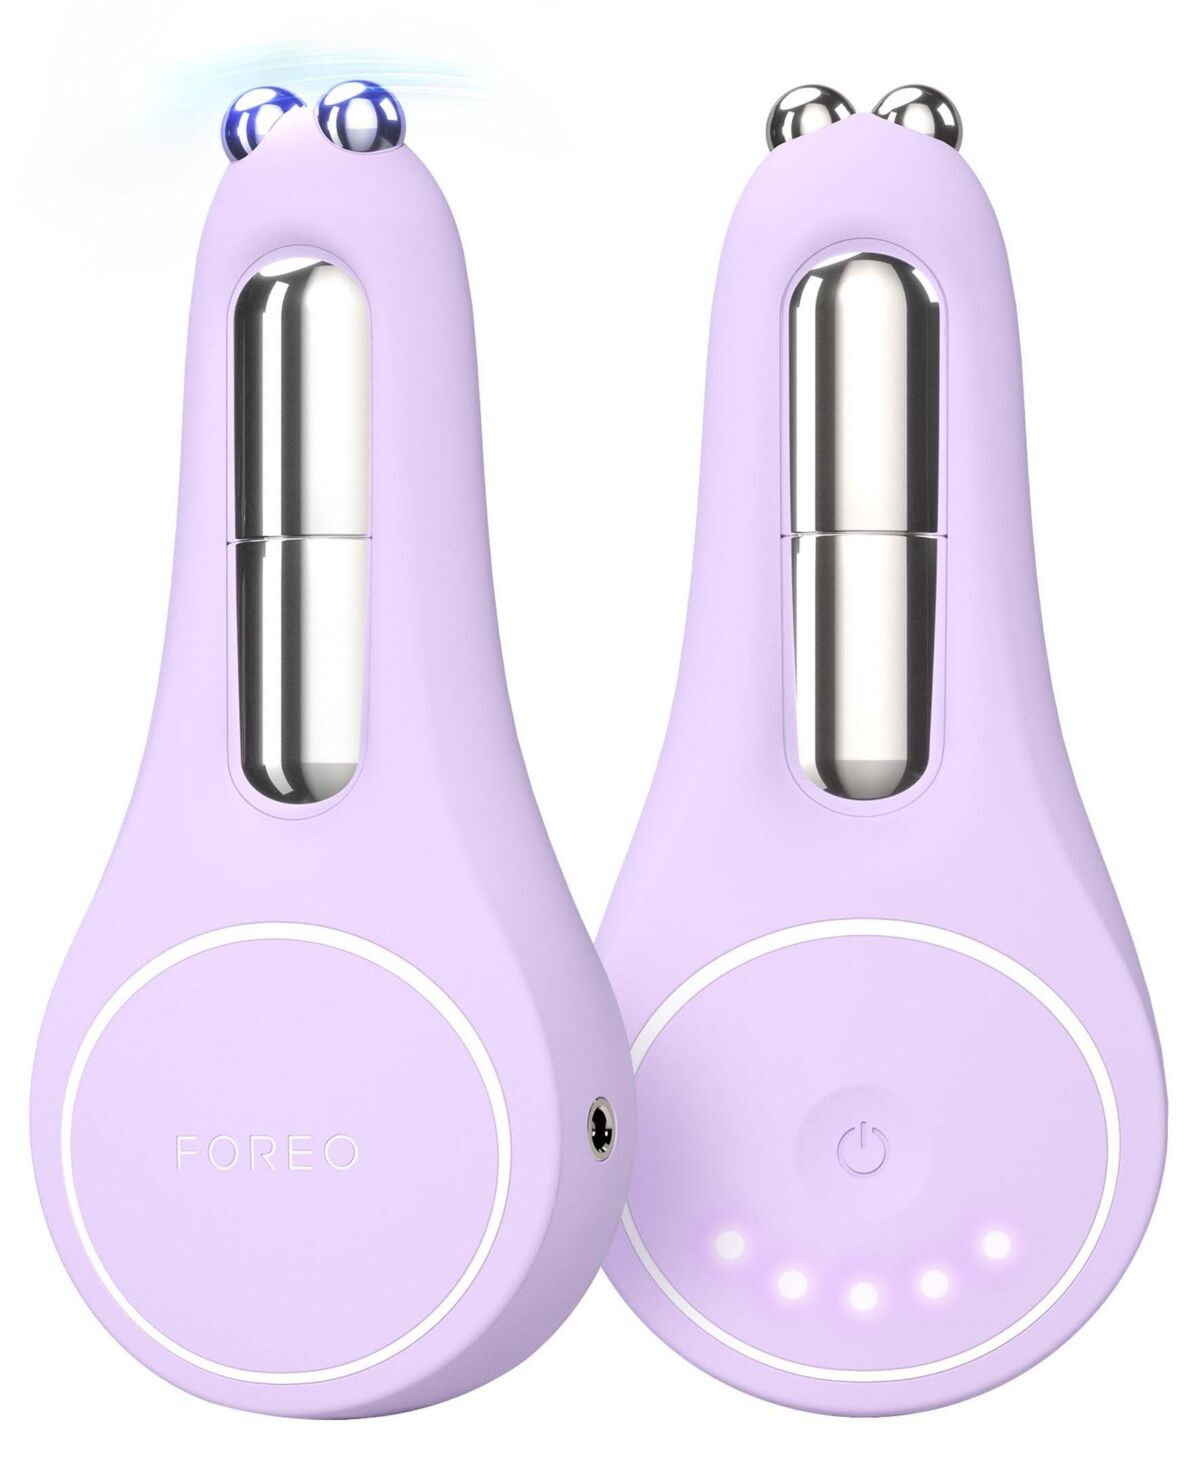 Foreo Bear 2 eyes lips Microcurrent Line Smoothing Device - Lavender